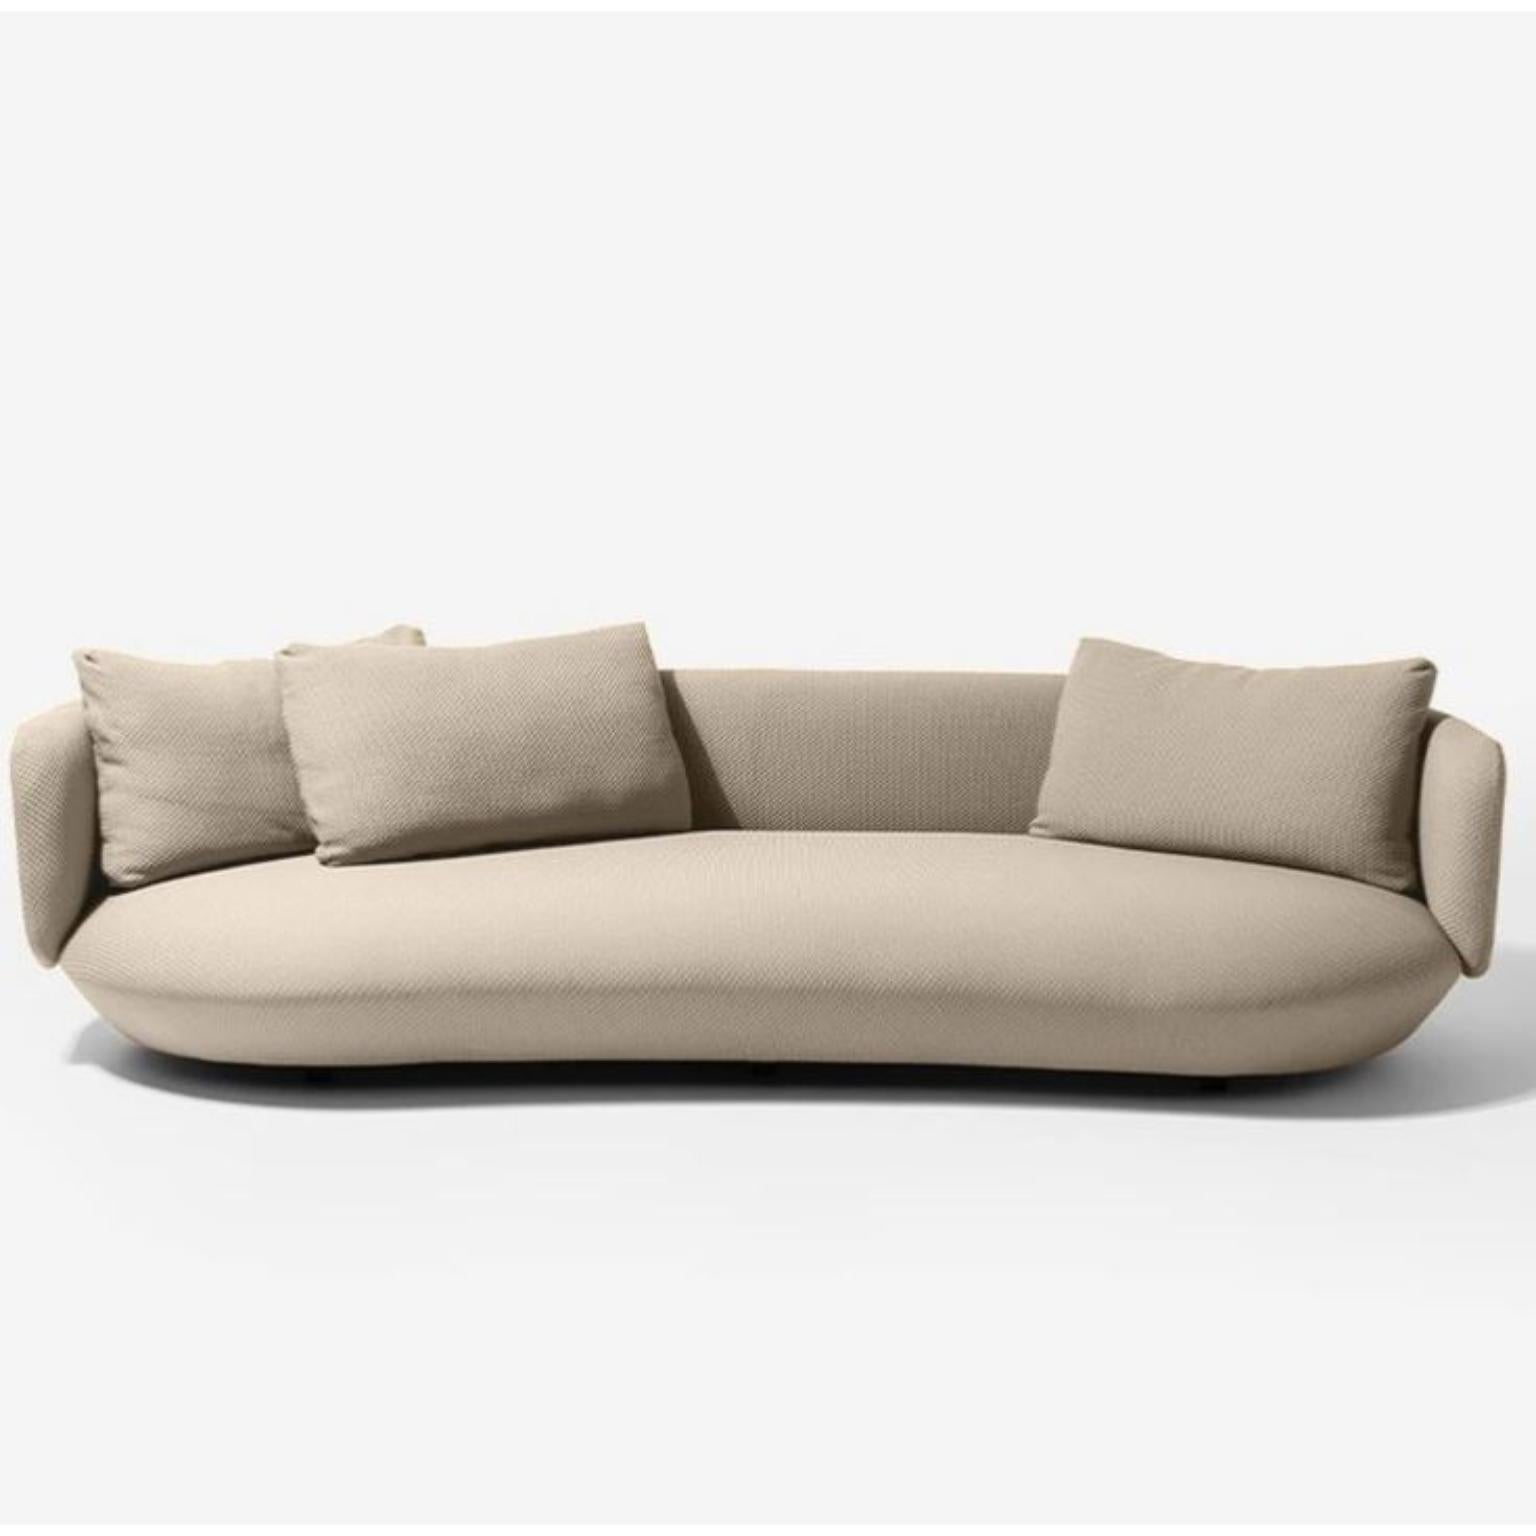 Medium Baixo Sofa by Wentz
Dimensions: D 110 x W 250 x H 58 cm
Materials: Wood, Upholstery.
3 cushions included

The Baixo sofa proposes a different way of sitting. An invitation to casual comfort, closer to the ground. The organic structure is